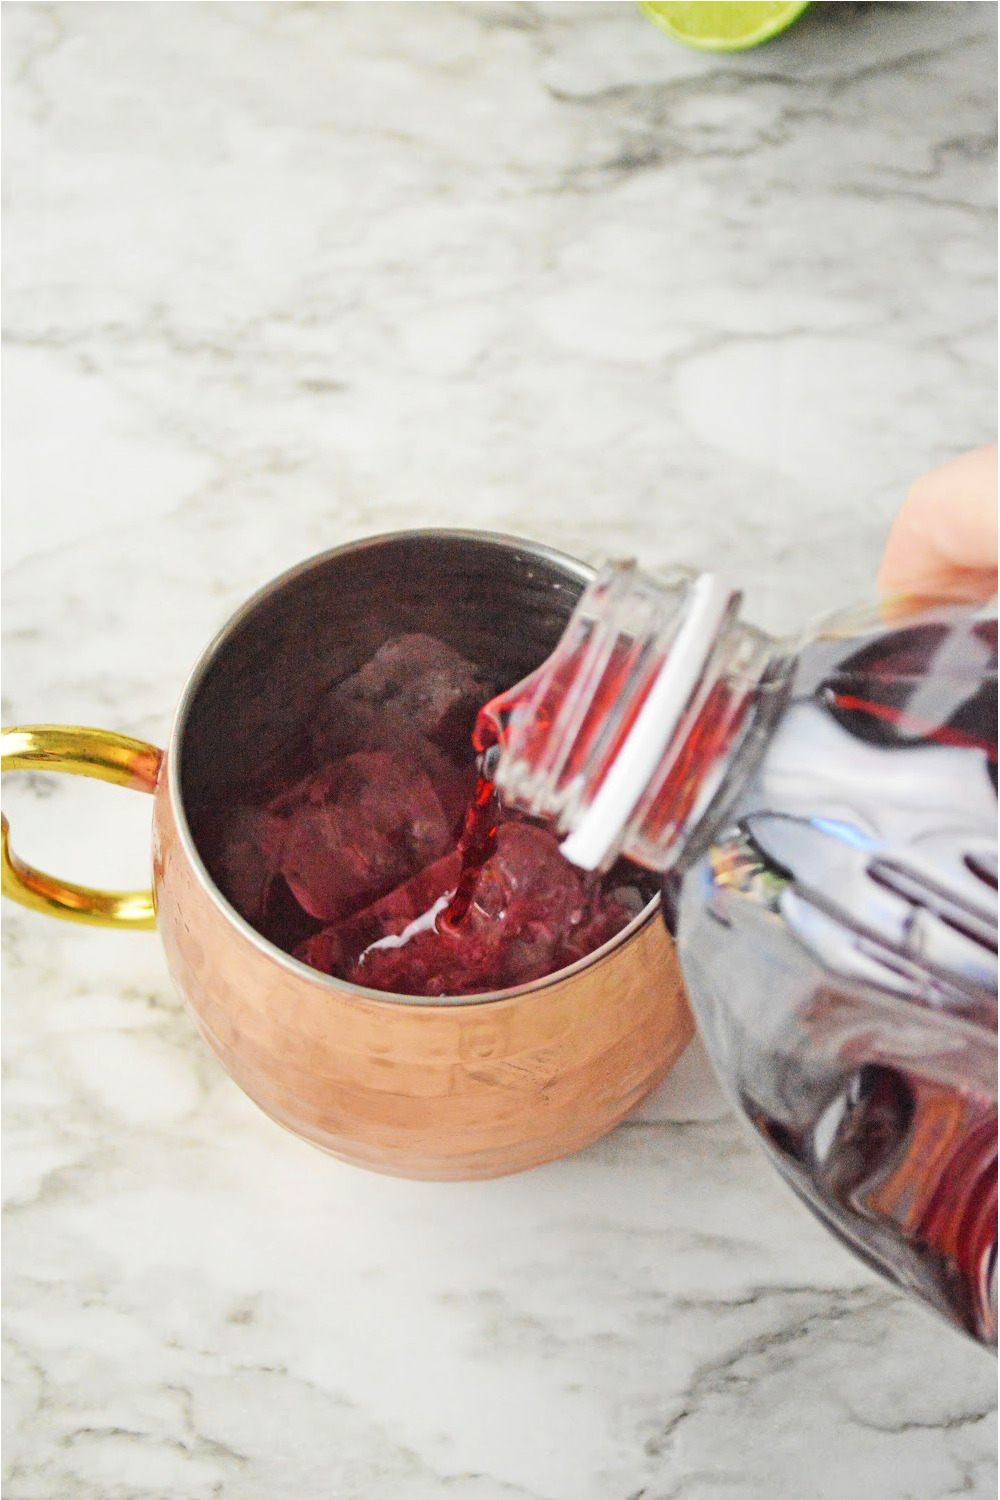 Pouring ingredients into a copper mug to make a cranberry Moscow mule.